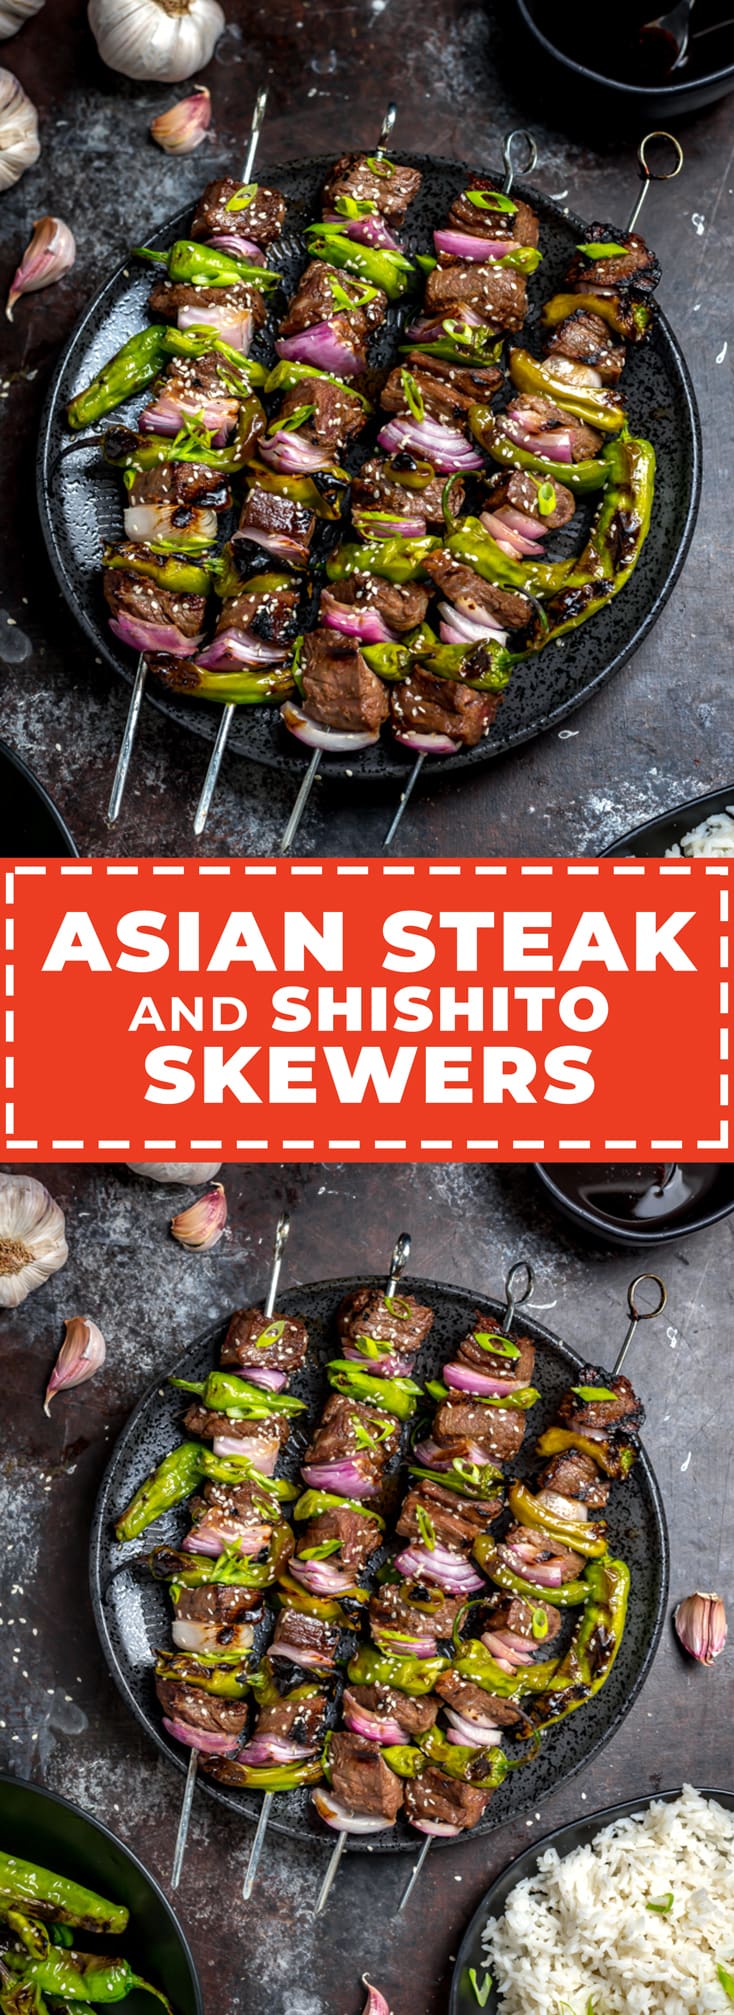 There’s more to these Asian Steak and Shishito Skewers than meets the eye. The sweet and garlicky marinated steak will be love at first bite, while the rare spicy surprise of a hot shishito keeps you coming back for more. | hostthetoast.com